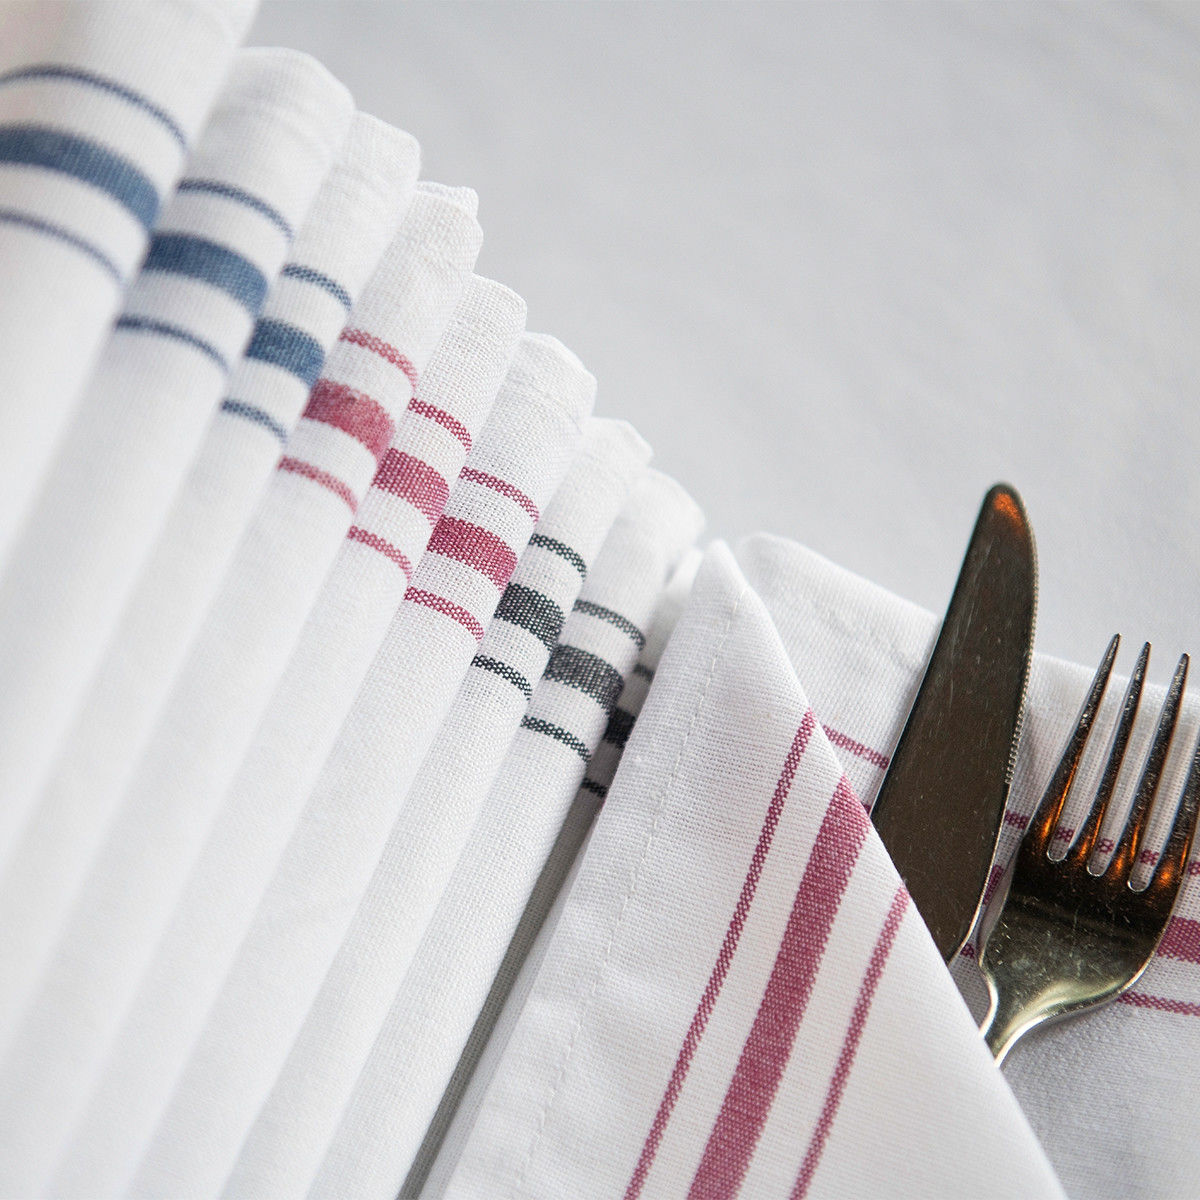 What sets these Bistro Cotton napkins apart from others in terms of performance and suitability for restaurants?